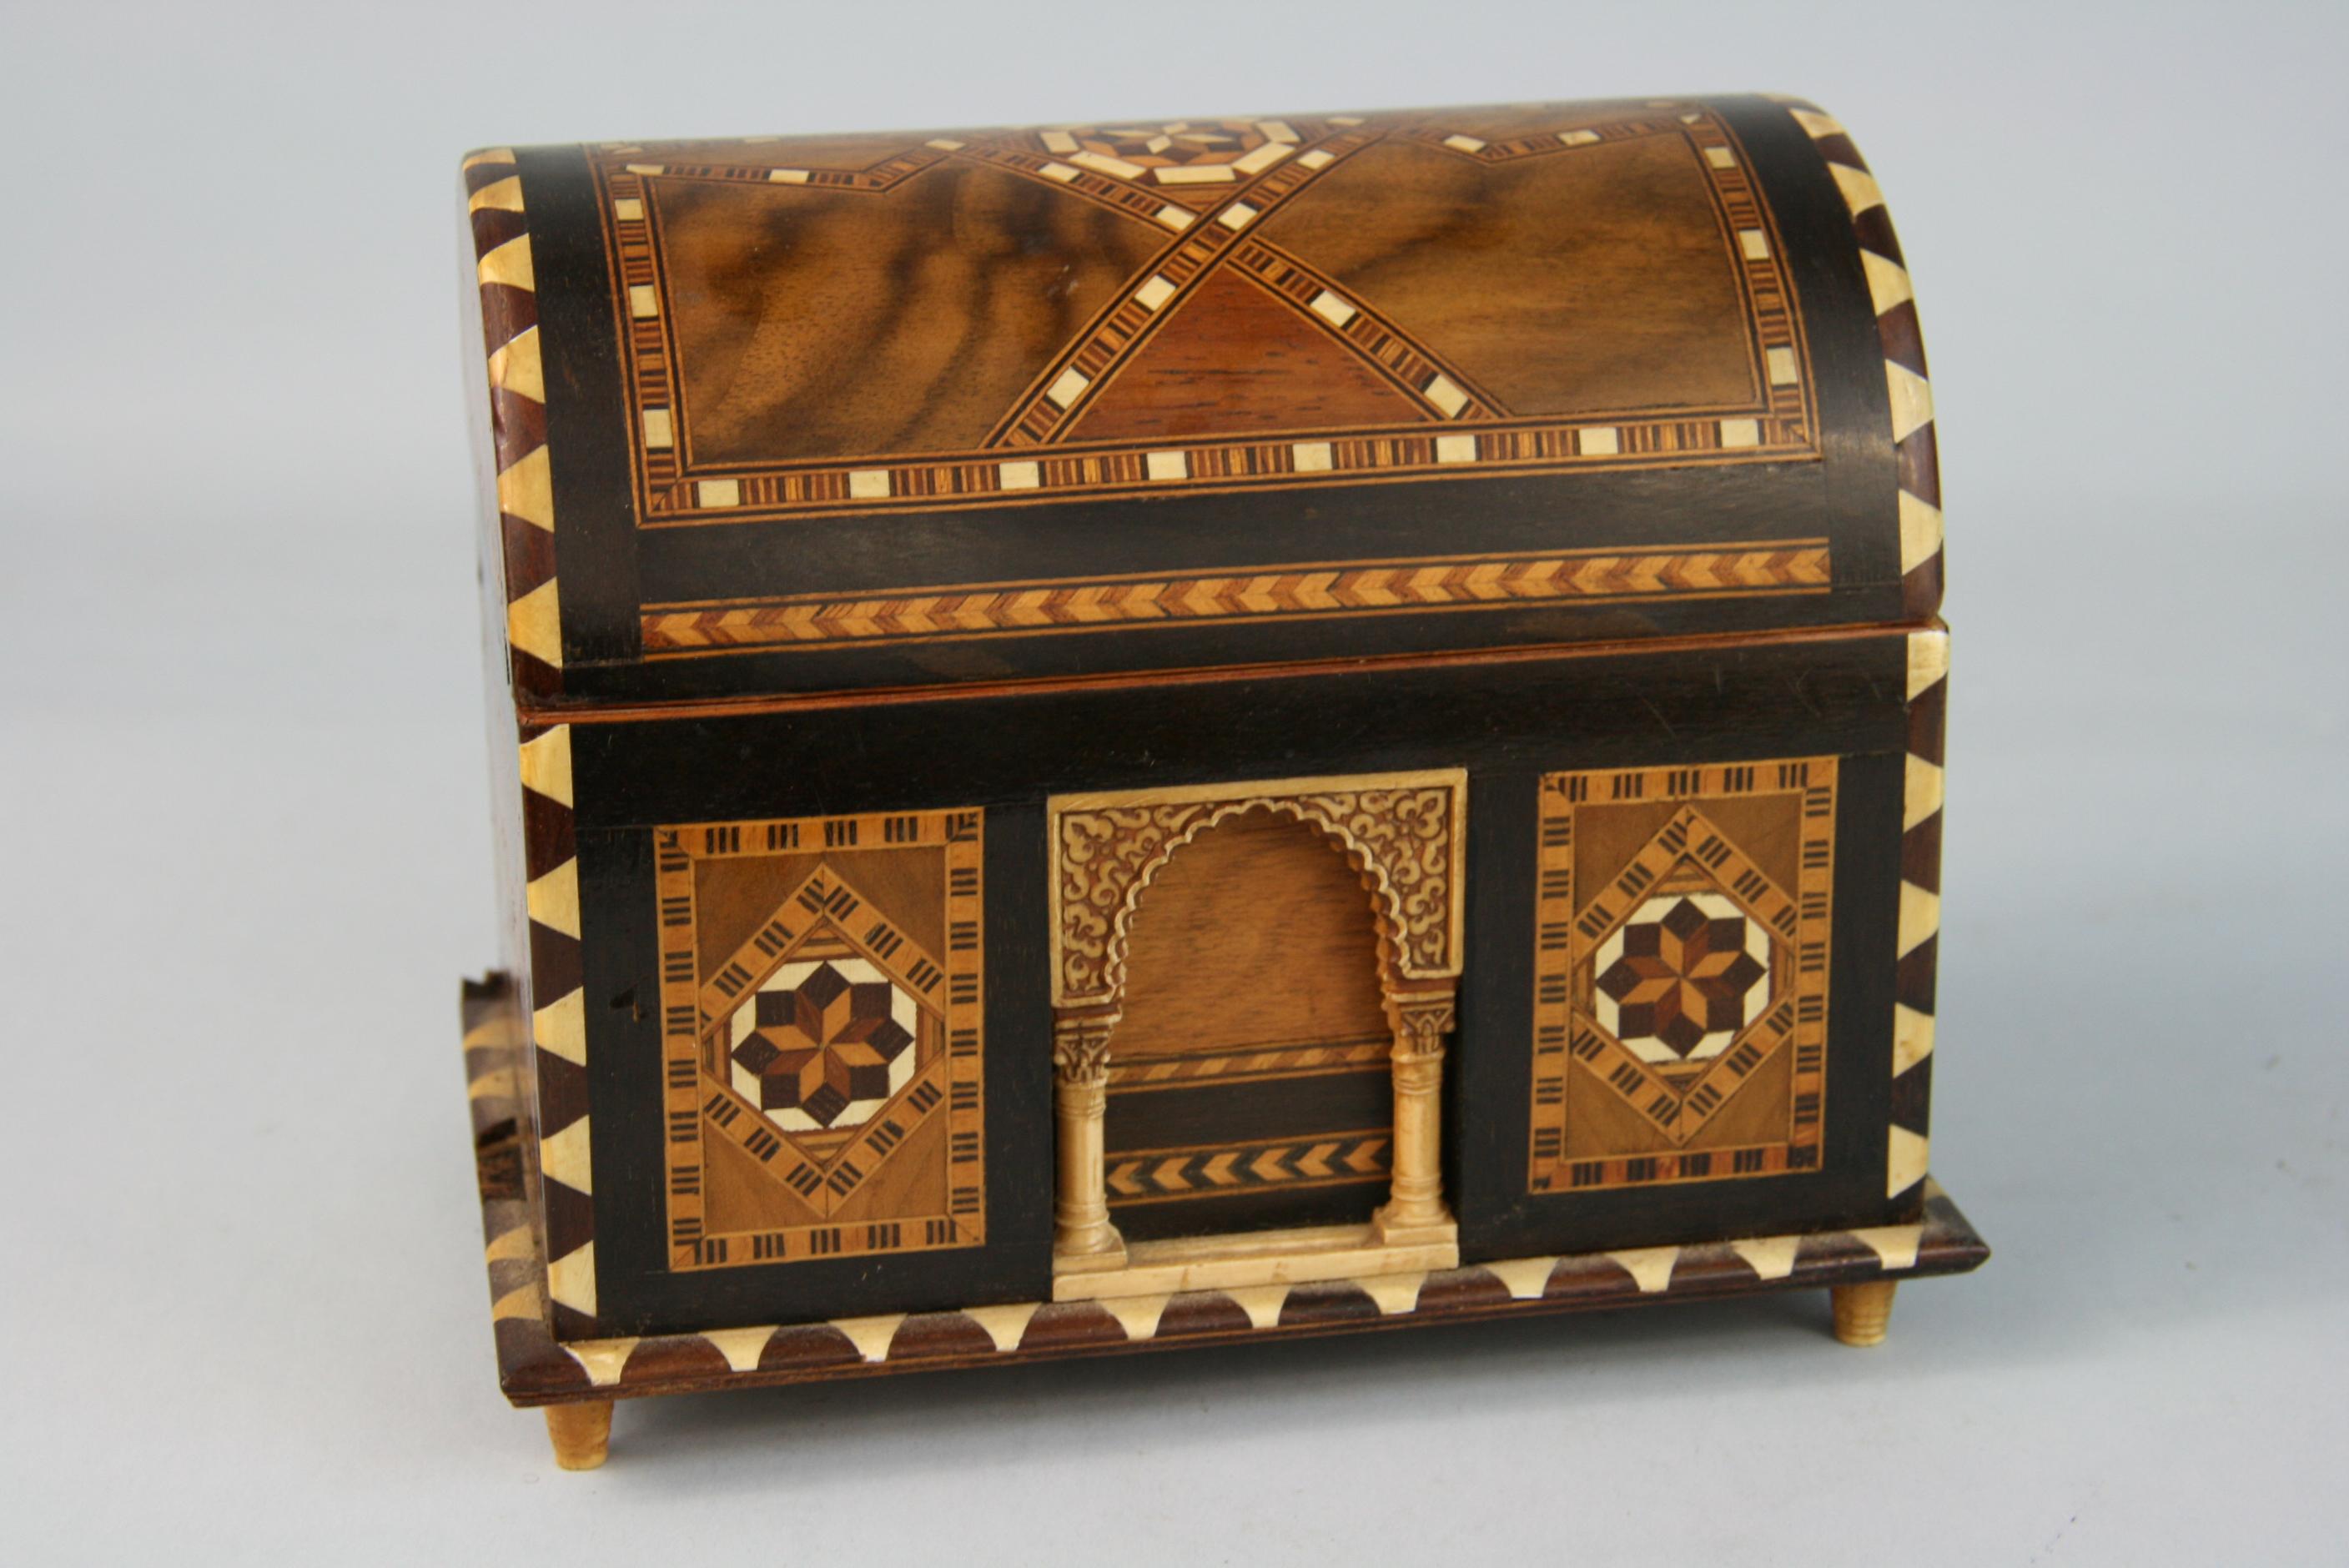 3-657 Intricate detailed wood inlaid box with column entrance.